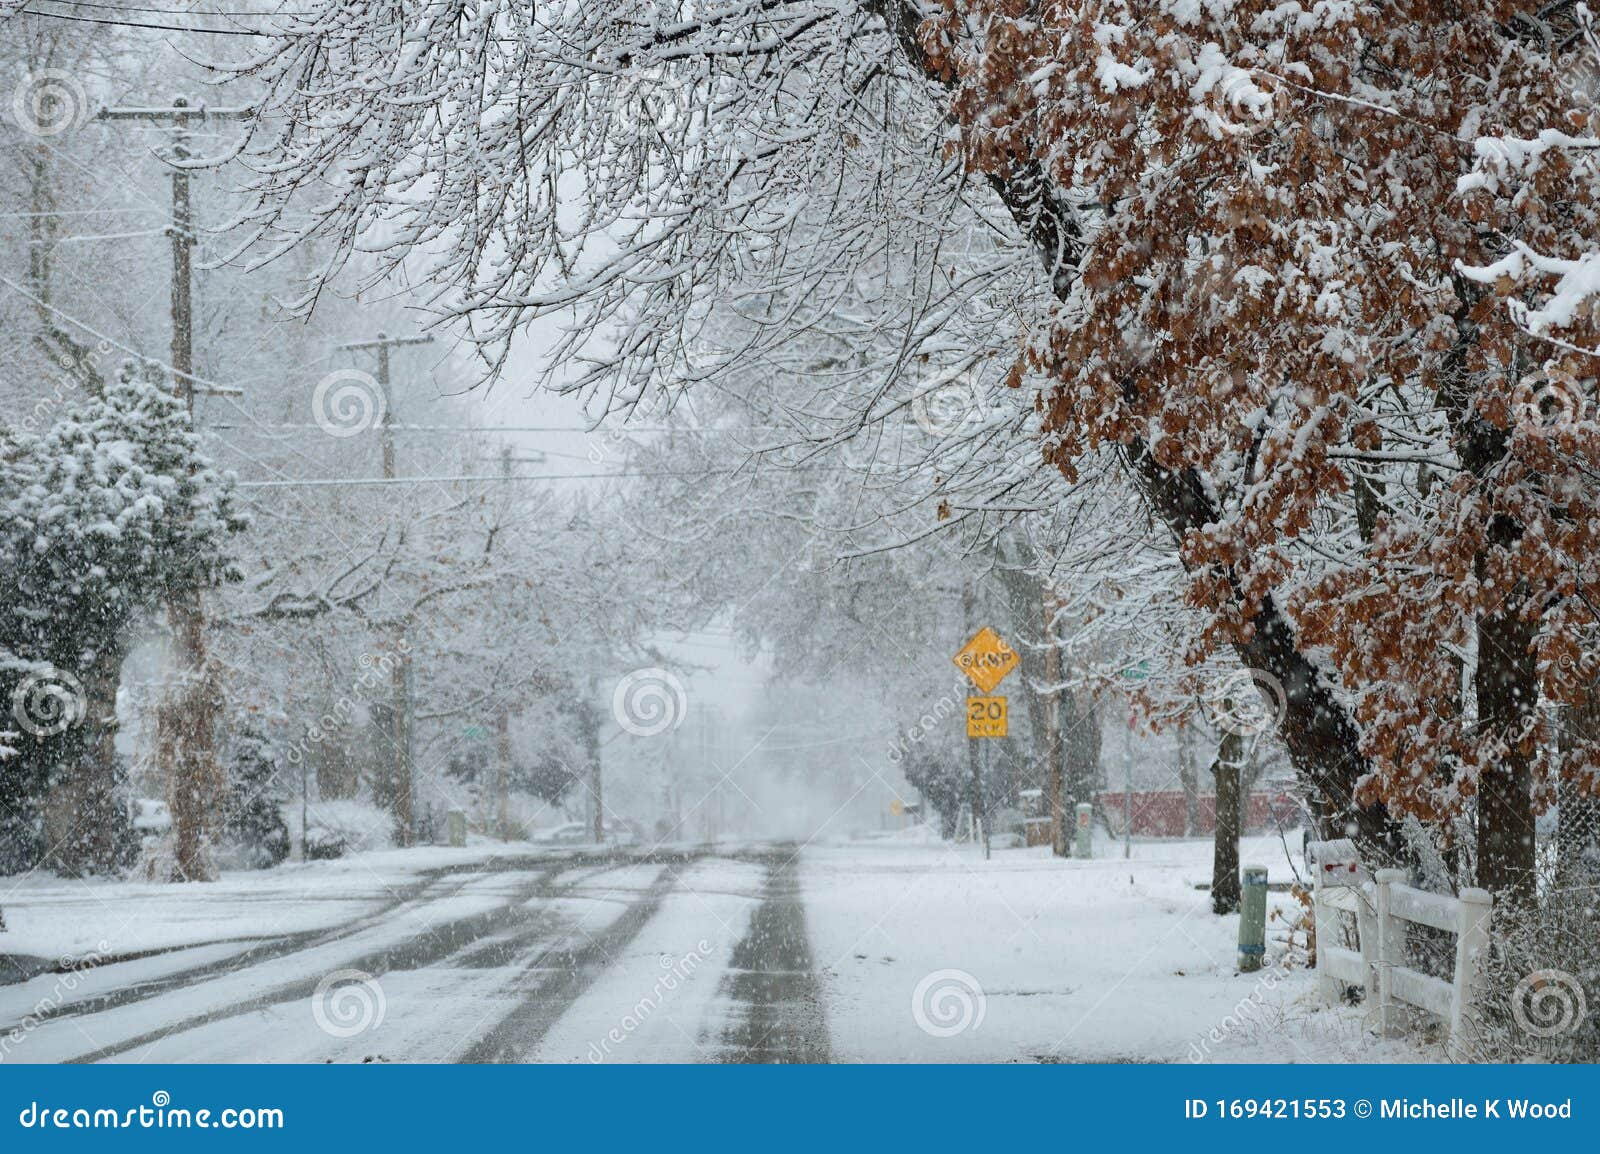 Residential Neighborhood City Street in Severe Snowstorm Close Up Stock ...